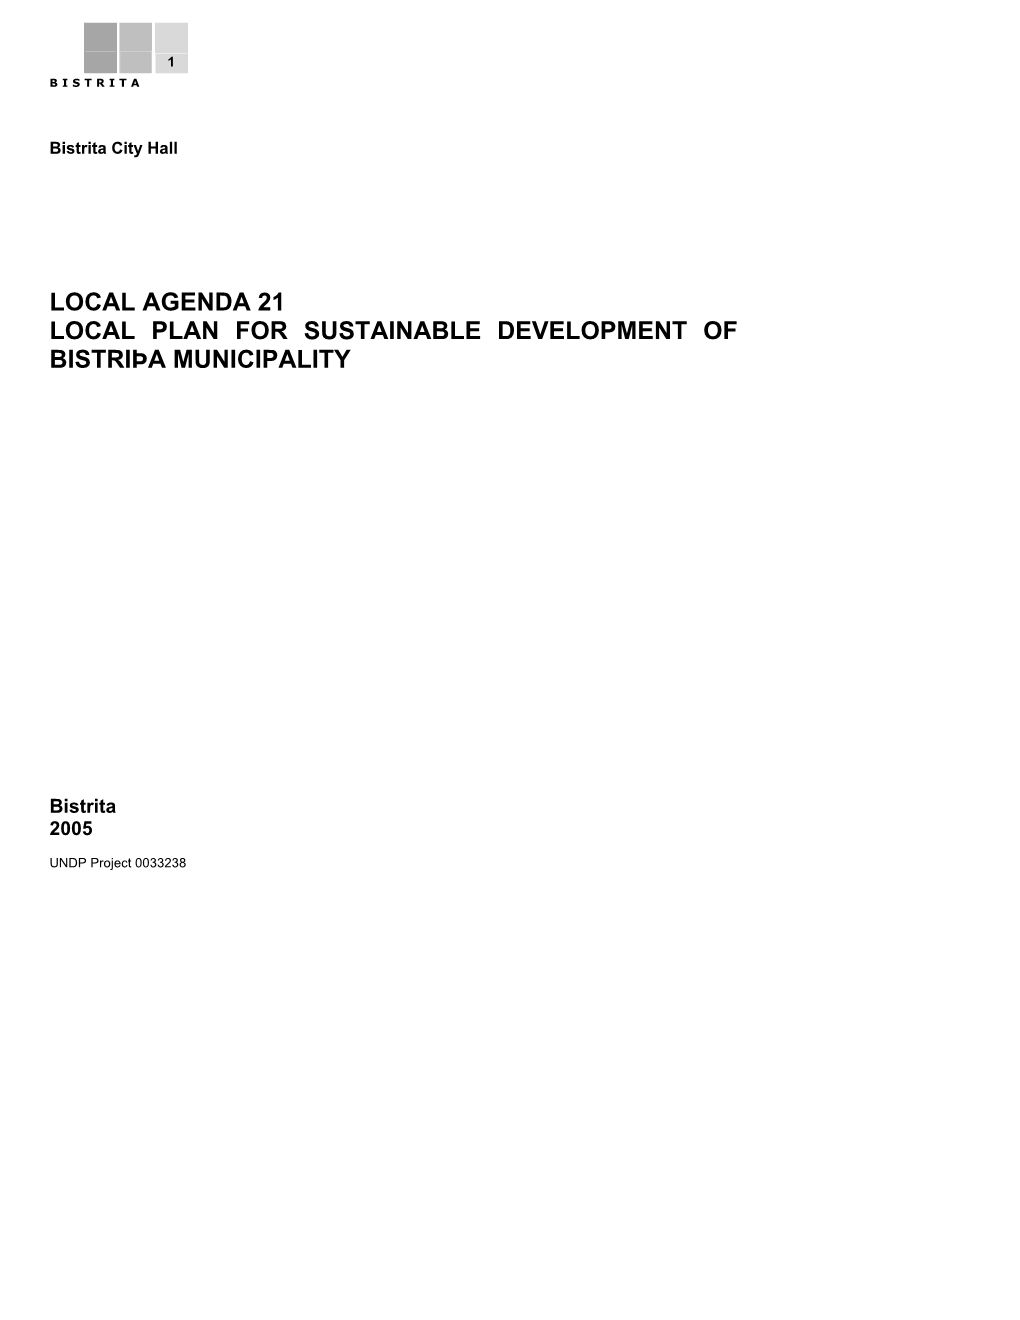 Local Agenda 21 Local Plan for Sustainable Development of Bistriþa Municipality